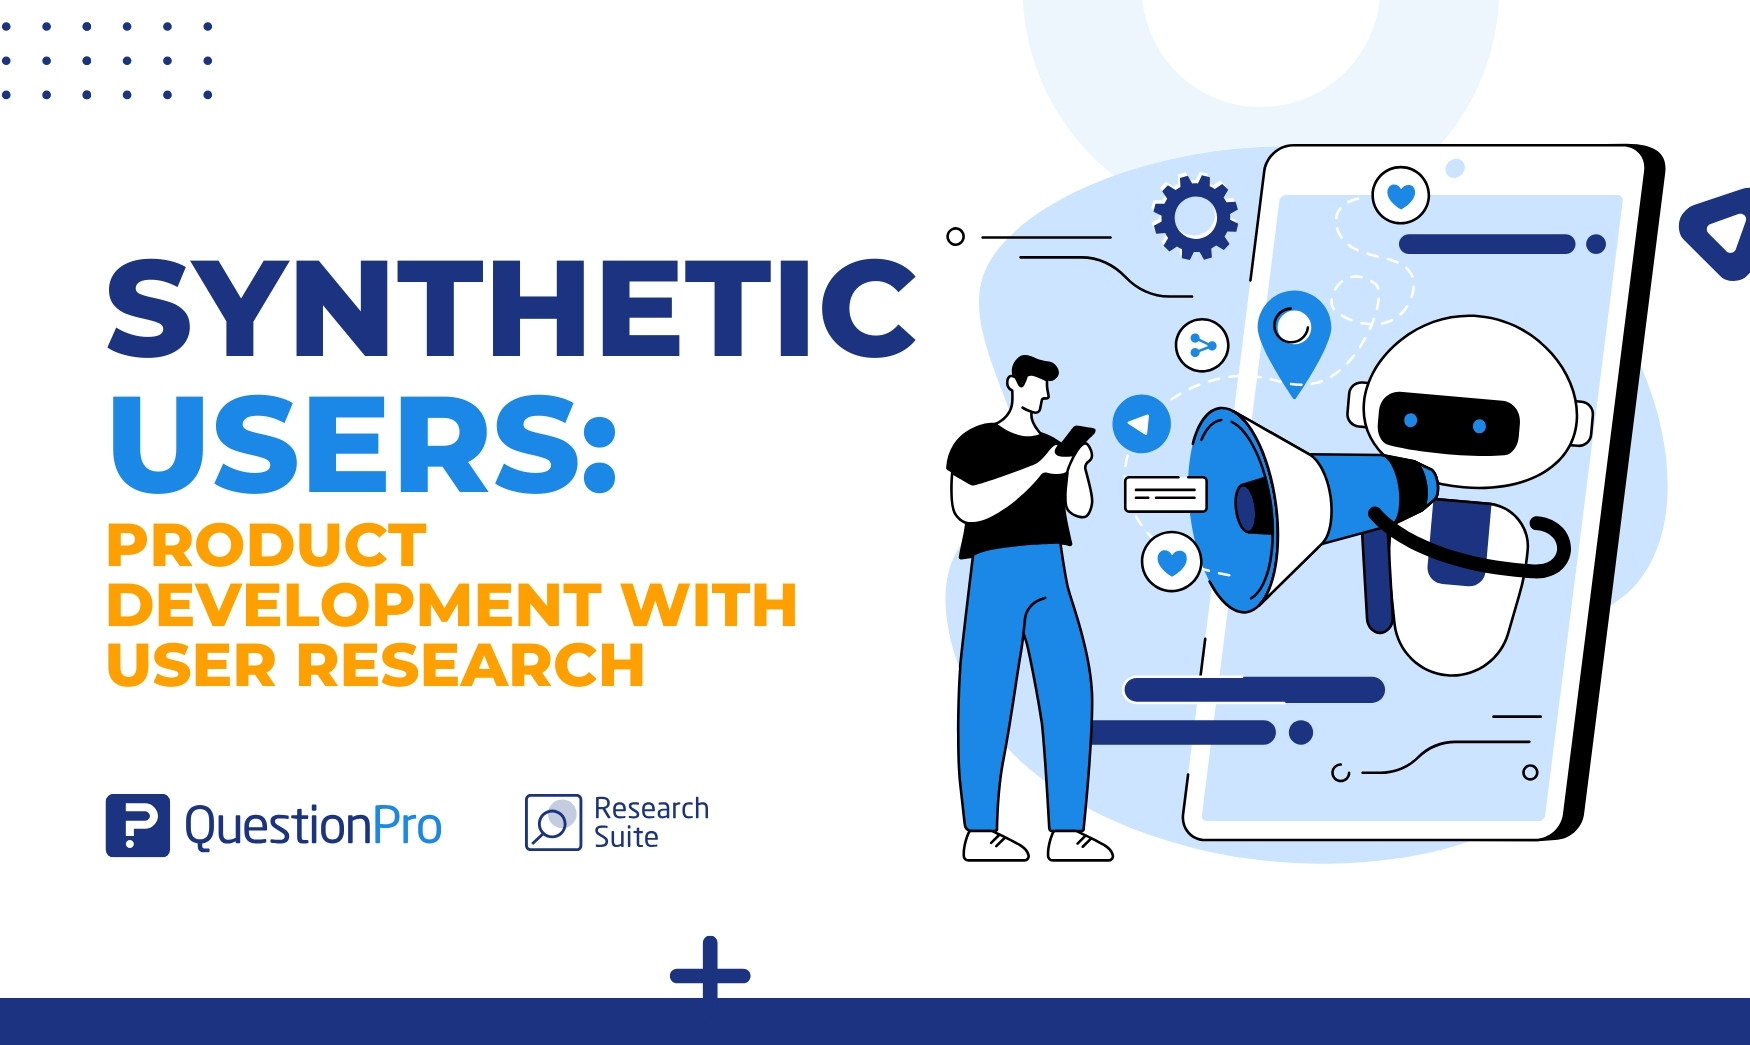 Synthetic users replicate human behavior for testing and research. Discover the power of Synthetic Users in user research.